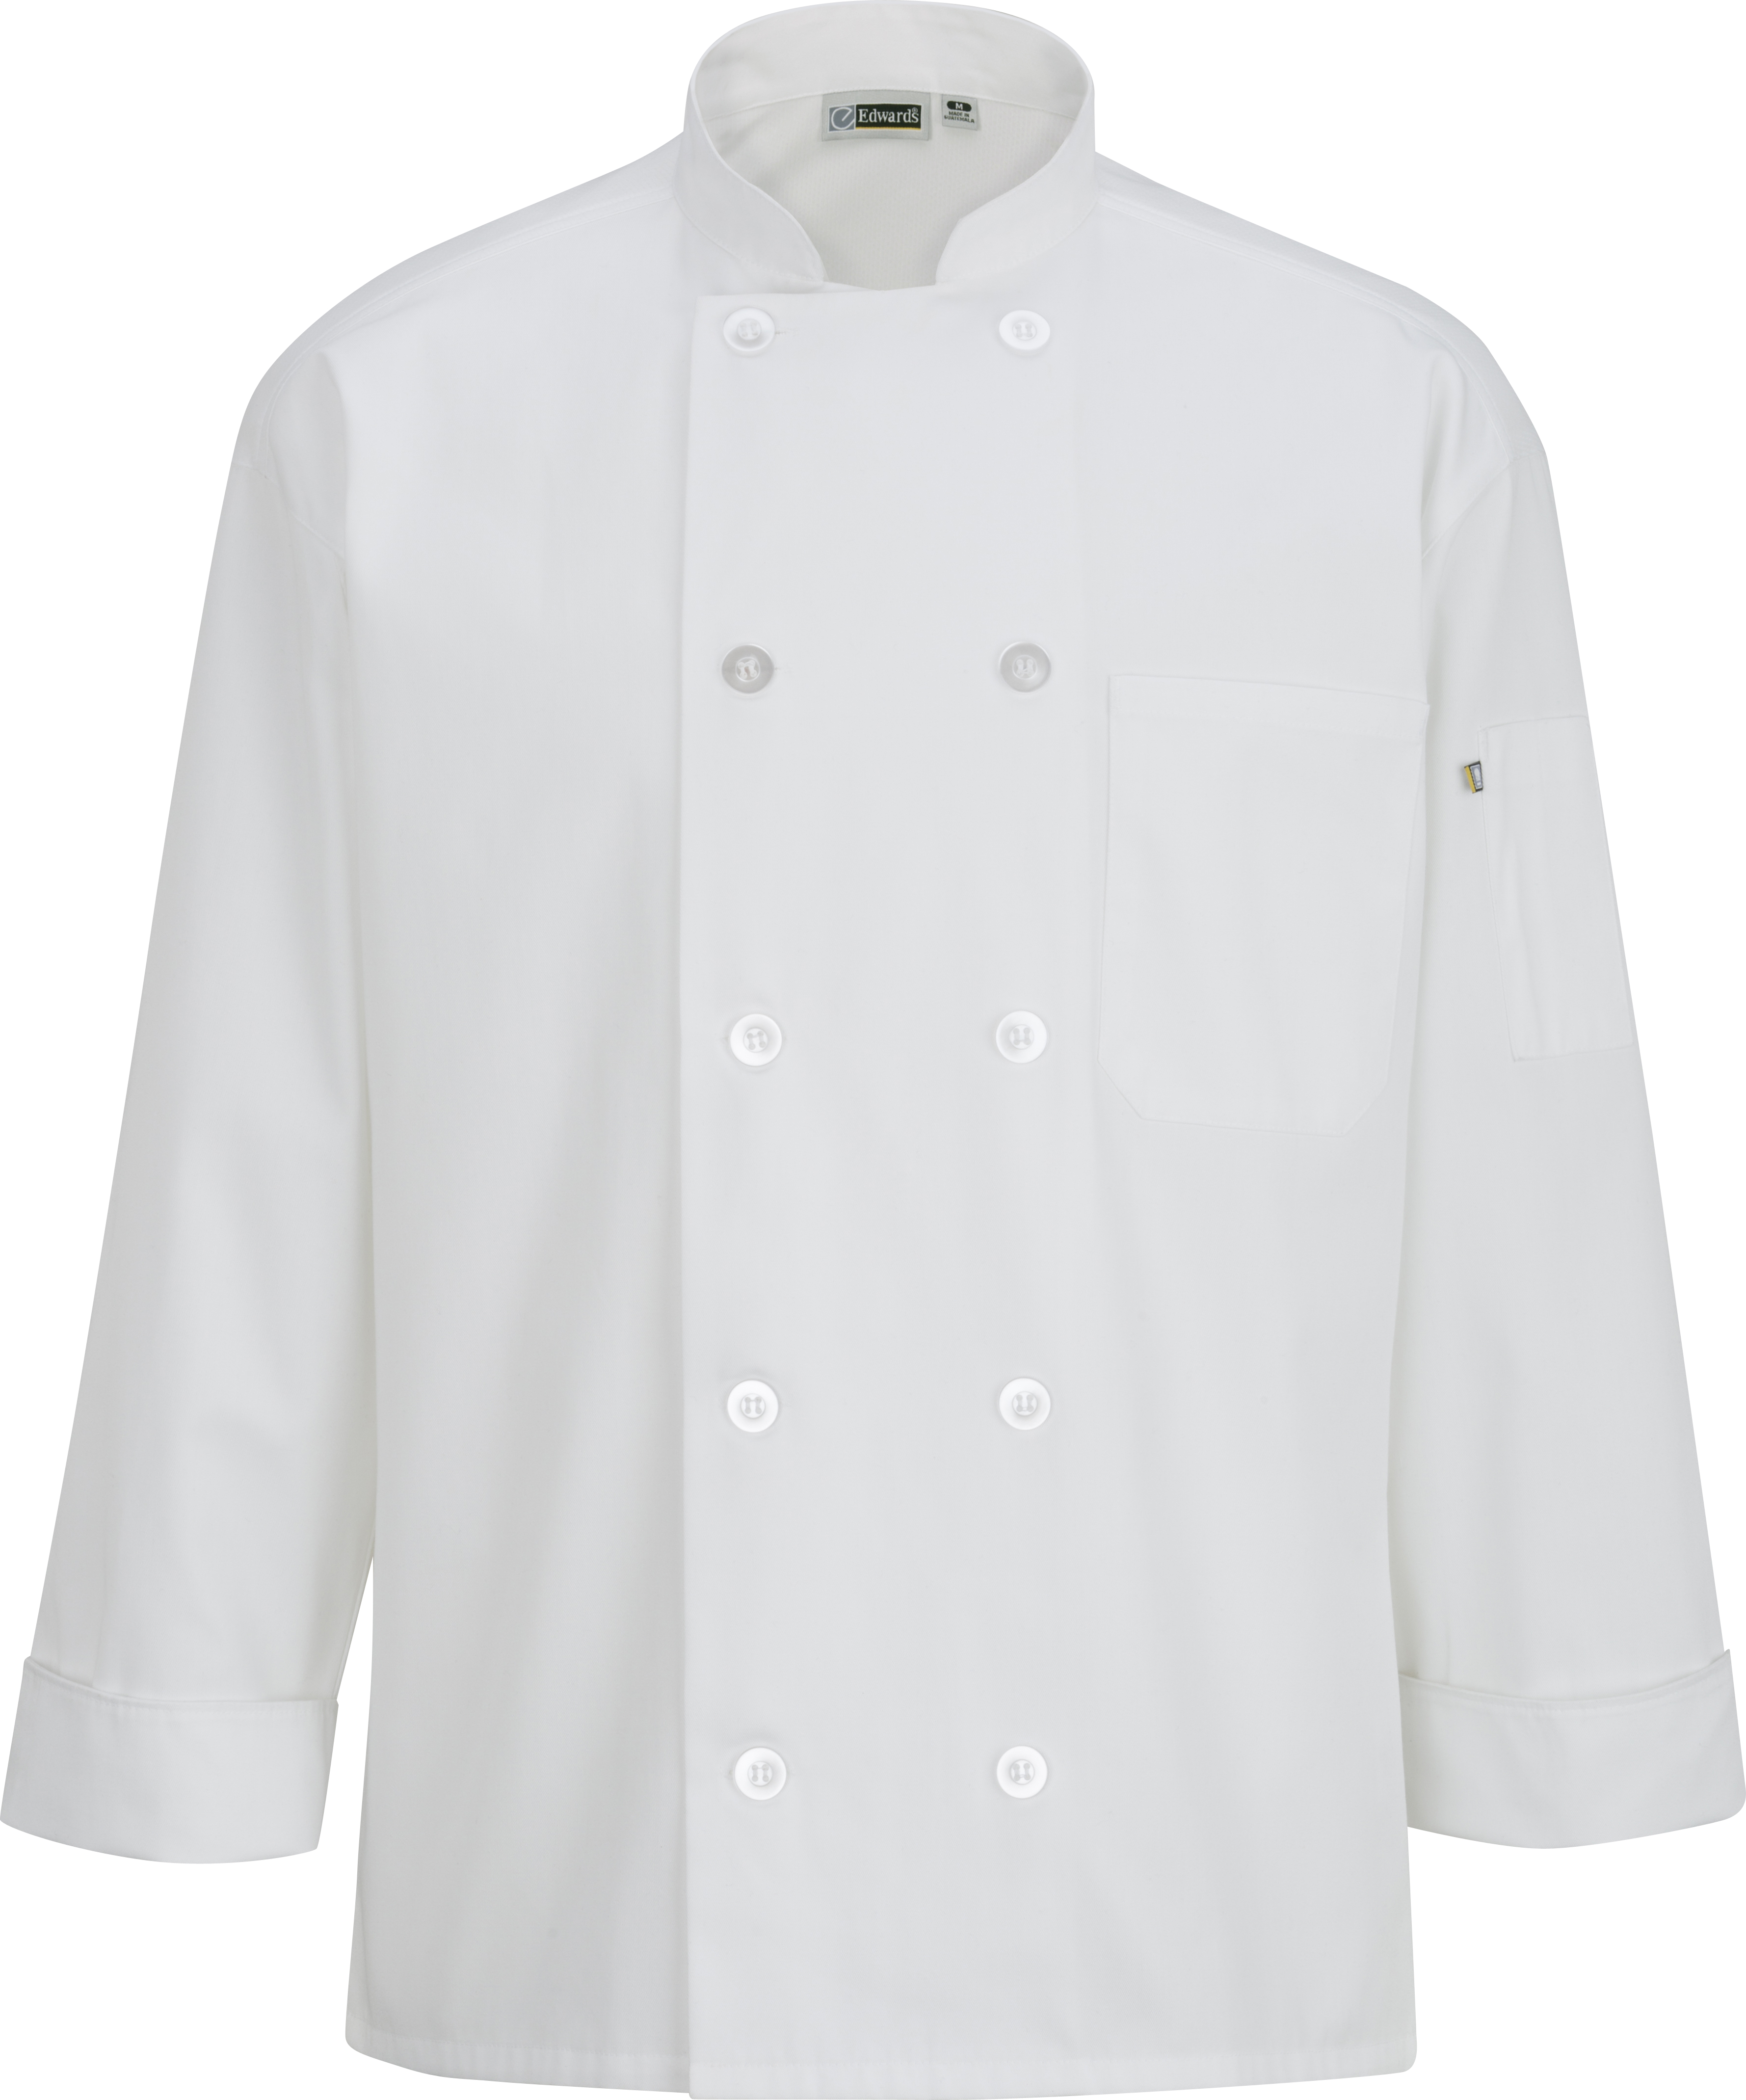 10 Button Mesh Back Long Sleeve Pocket Chef Coat Jacket S-XL White New All Star 